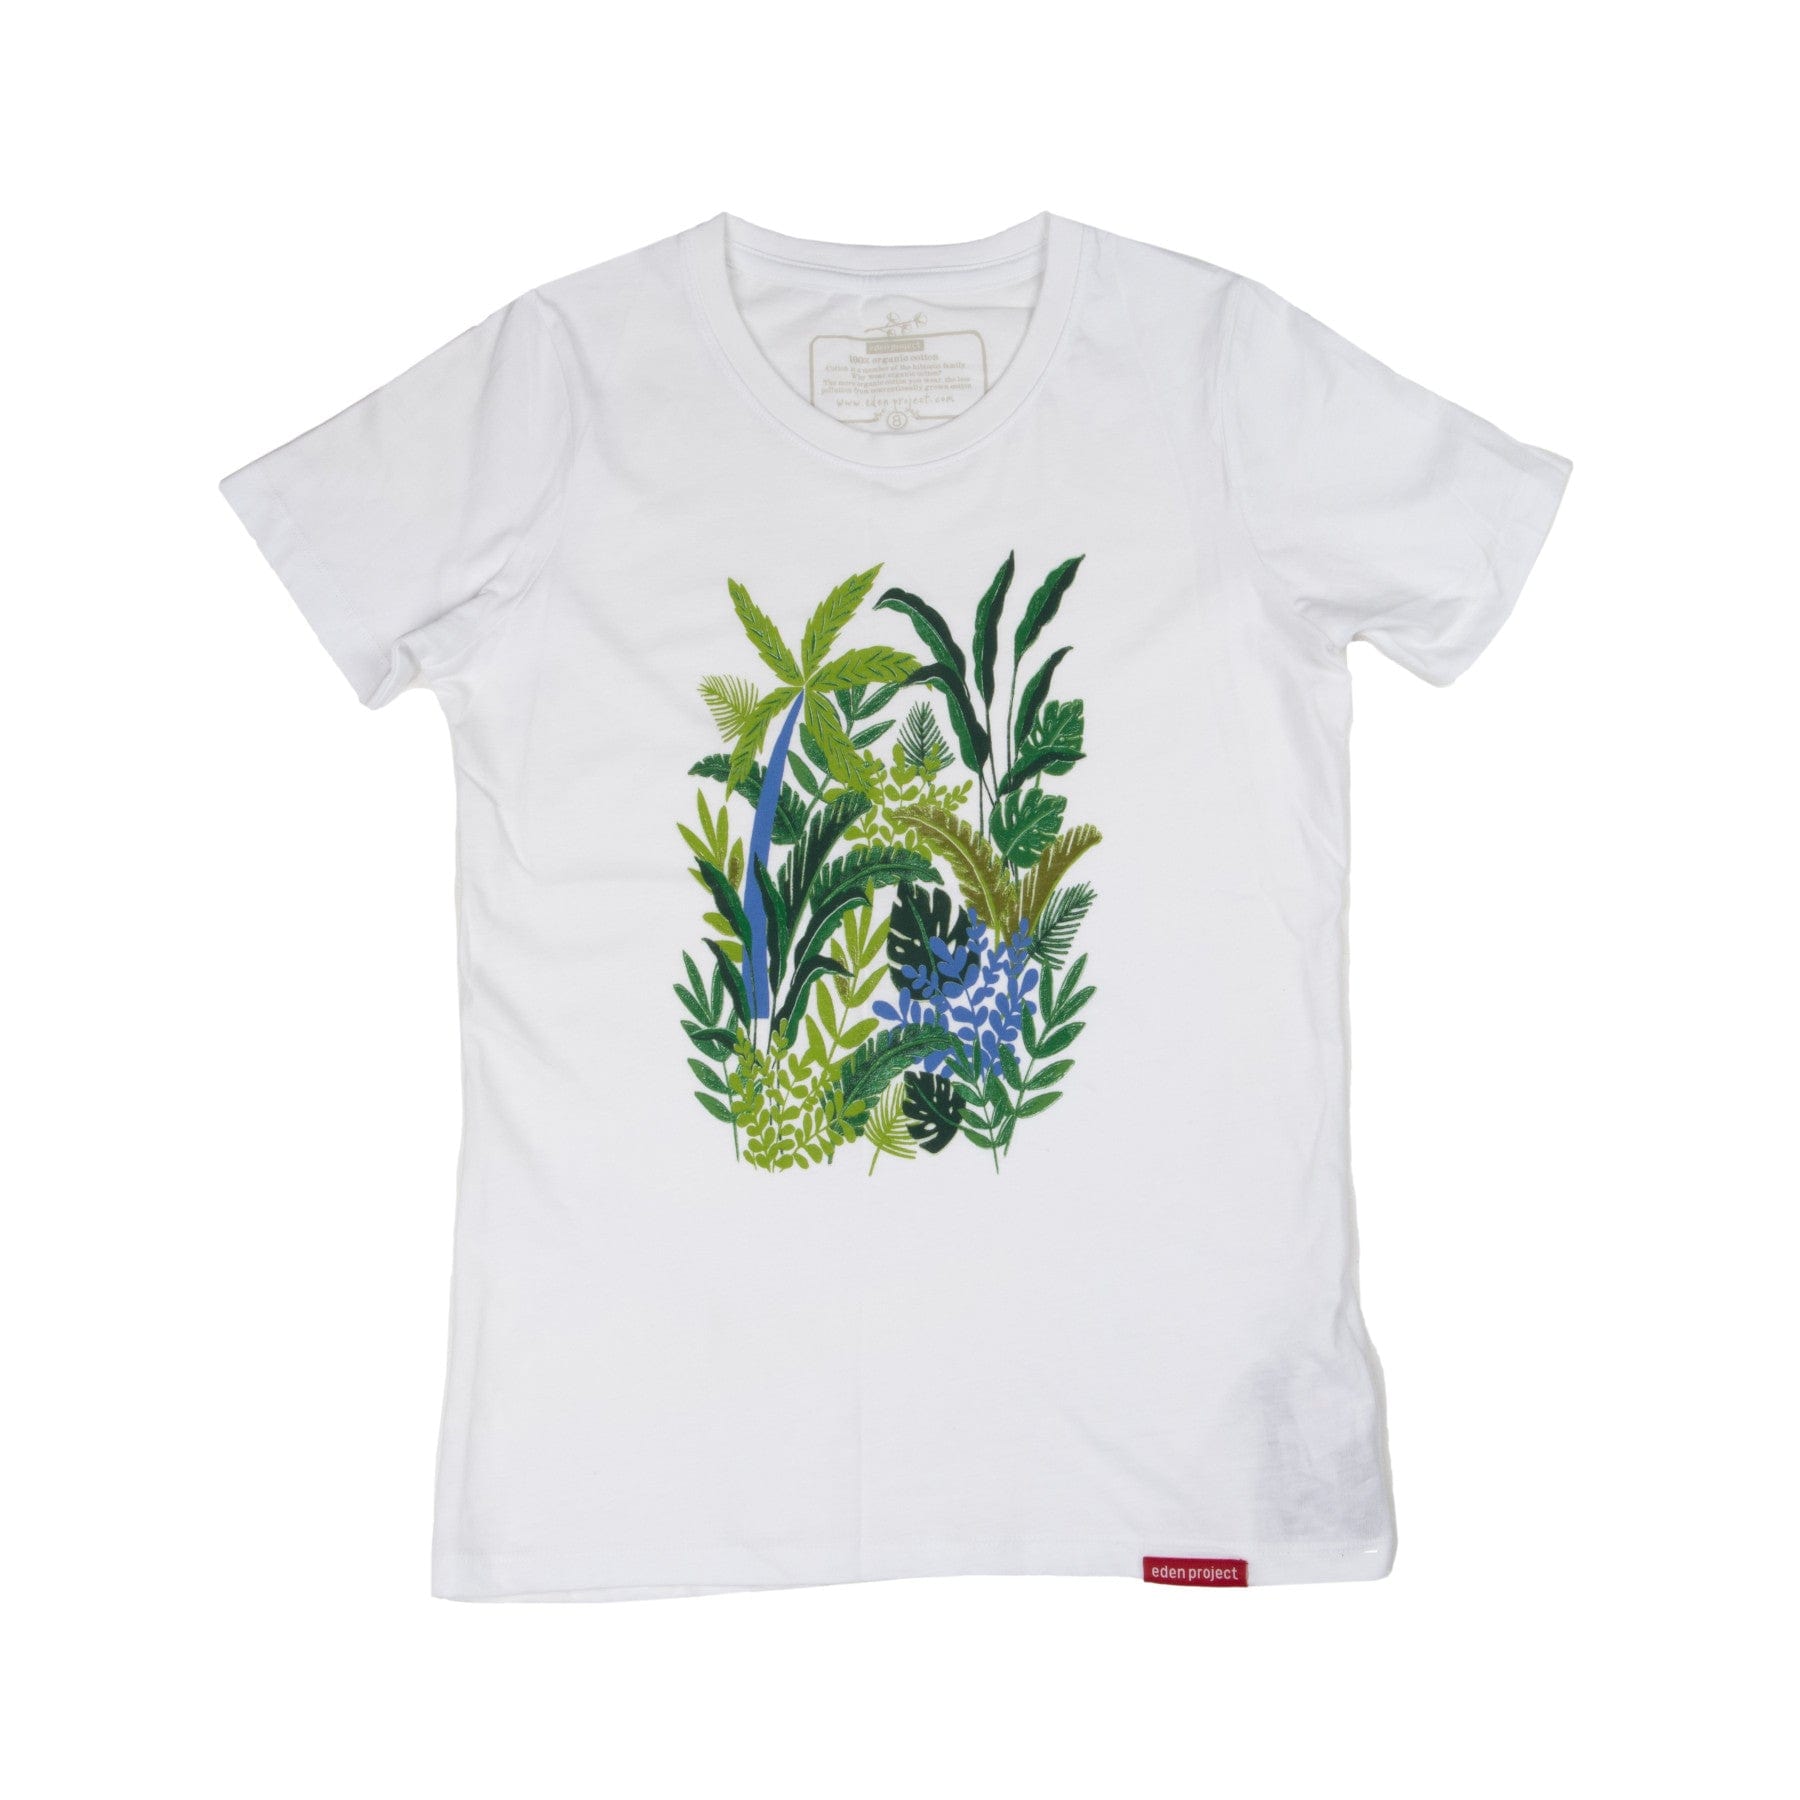 White t-shirt with botanical print, floral graphic tee, short-sleeved cotton shirt with green and blue plant design, casual summer top with foliage illustration, clothing product shot on white background